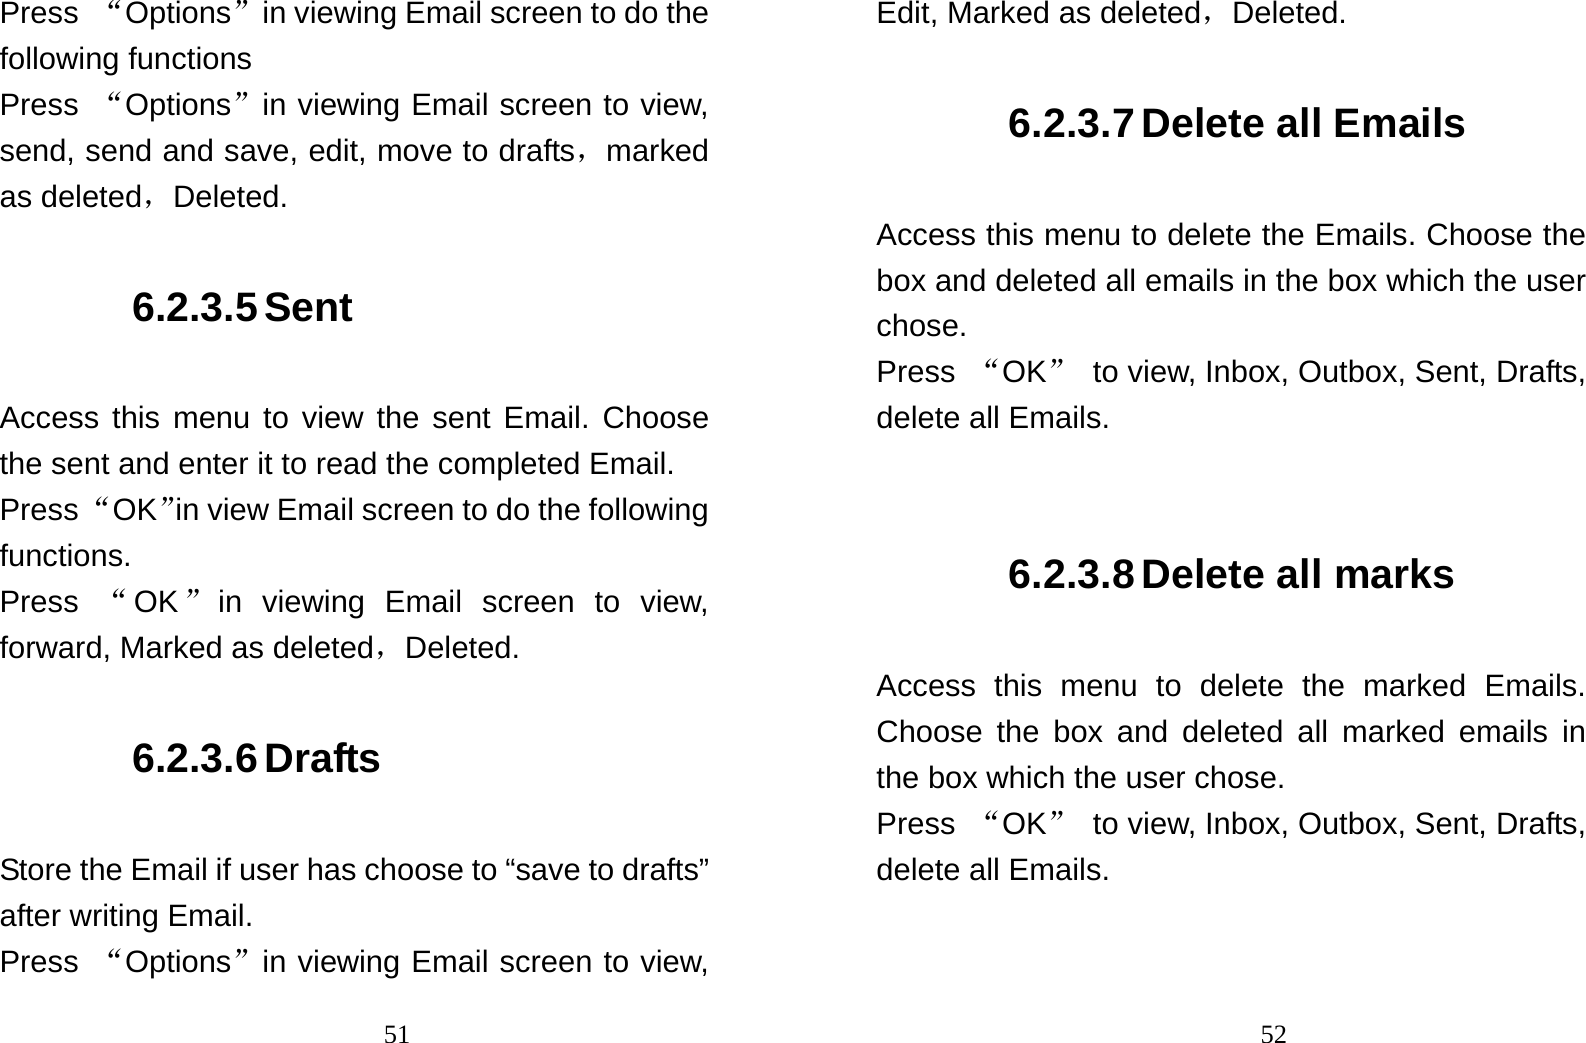                                51Press  “Options”in viewing Email screen to do the following functions Press  “Options”in viewing Email screen to view, send, send and save, edit, move to drafts，marked as deleted，Deleted. 6.2.3.5 Sent Access this menu to view the sent Email. Choose the sent and enter it to read the completed Email. Press “OK”in view Email screen to do the following functions. Press  “OK”in viewing Email screen to view, forward, Marked as deleted，Deleted. 6.2.3.6 Drafts Store the Email if user has choose to “save to drafts” after writing Email. Press  “Options”in viewing Email screen to view,                                52Edit, Marked as deleted，Deleted. 6.2.3.7 Delete all Emails Access this menu to delete the Emails. Choose the box and deleted all emails in the box which the user chose. Press  “OK”  to view, Inbox, Outbox, Sent, Drafts, delete all Emails.  6.2.3.8 Delete all marks Access this menu to delete the marked Emails. Choose the box and deleted all marked emails in the box which the user chose. Press  “OK”  to view, Inbox, Outbox, Sent, Drafts, delete all Emails. 